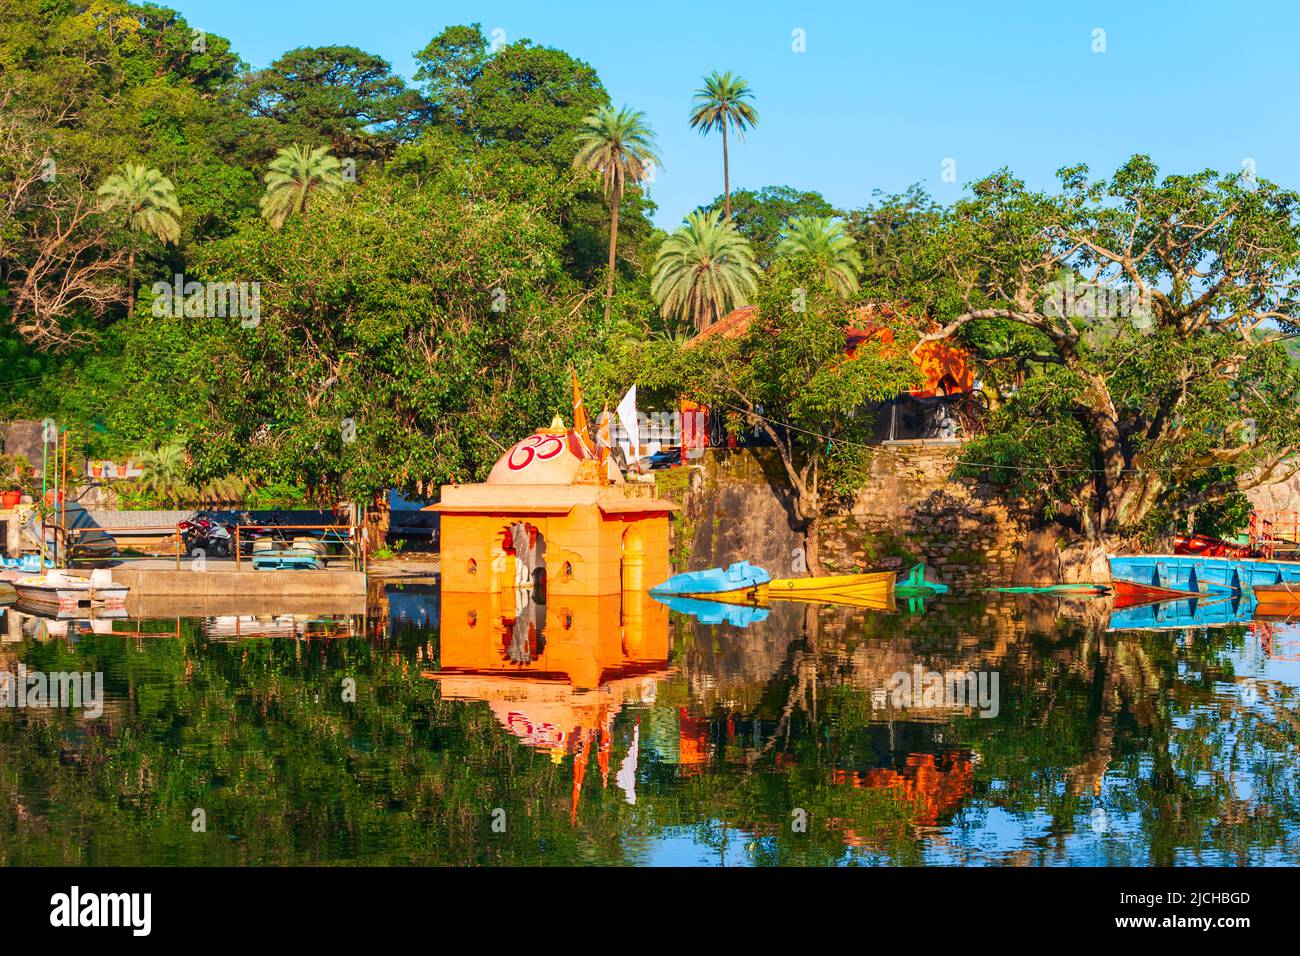 Shiva Temple on Nakki lake in Mount Abu. Mount Abu is a hill station in Rajasthan state, India. Stock Photo